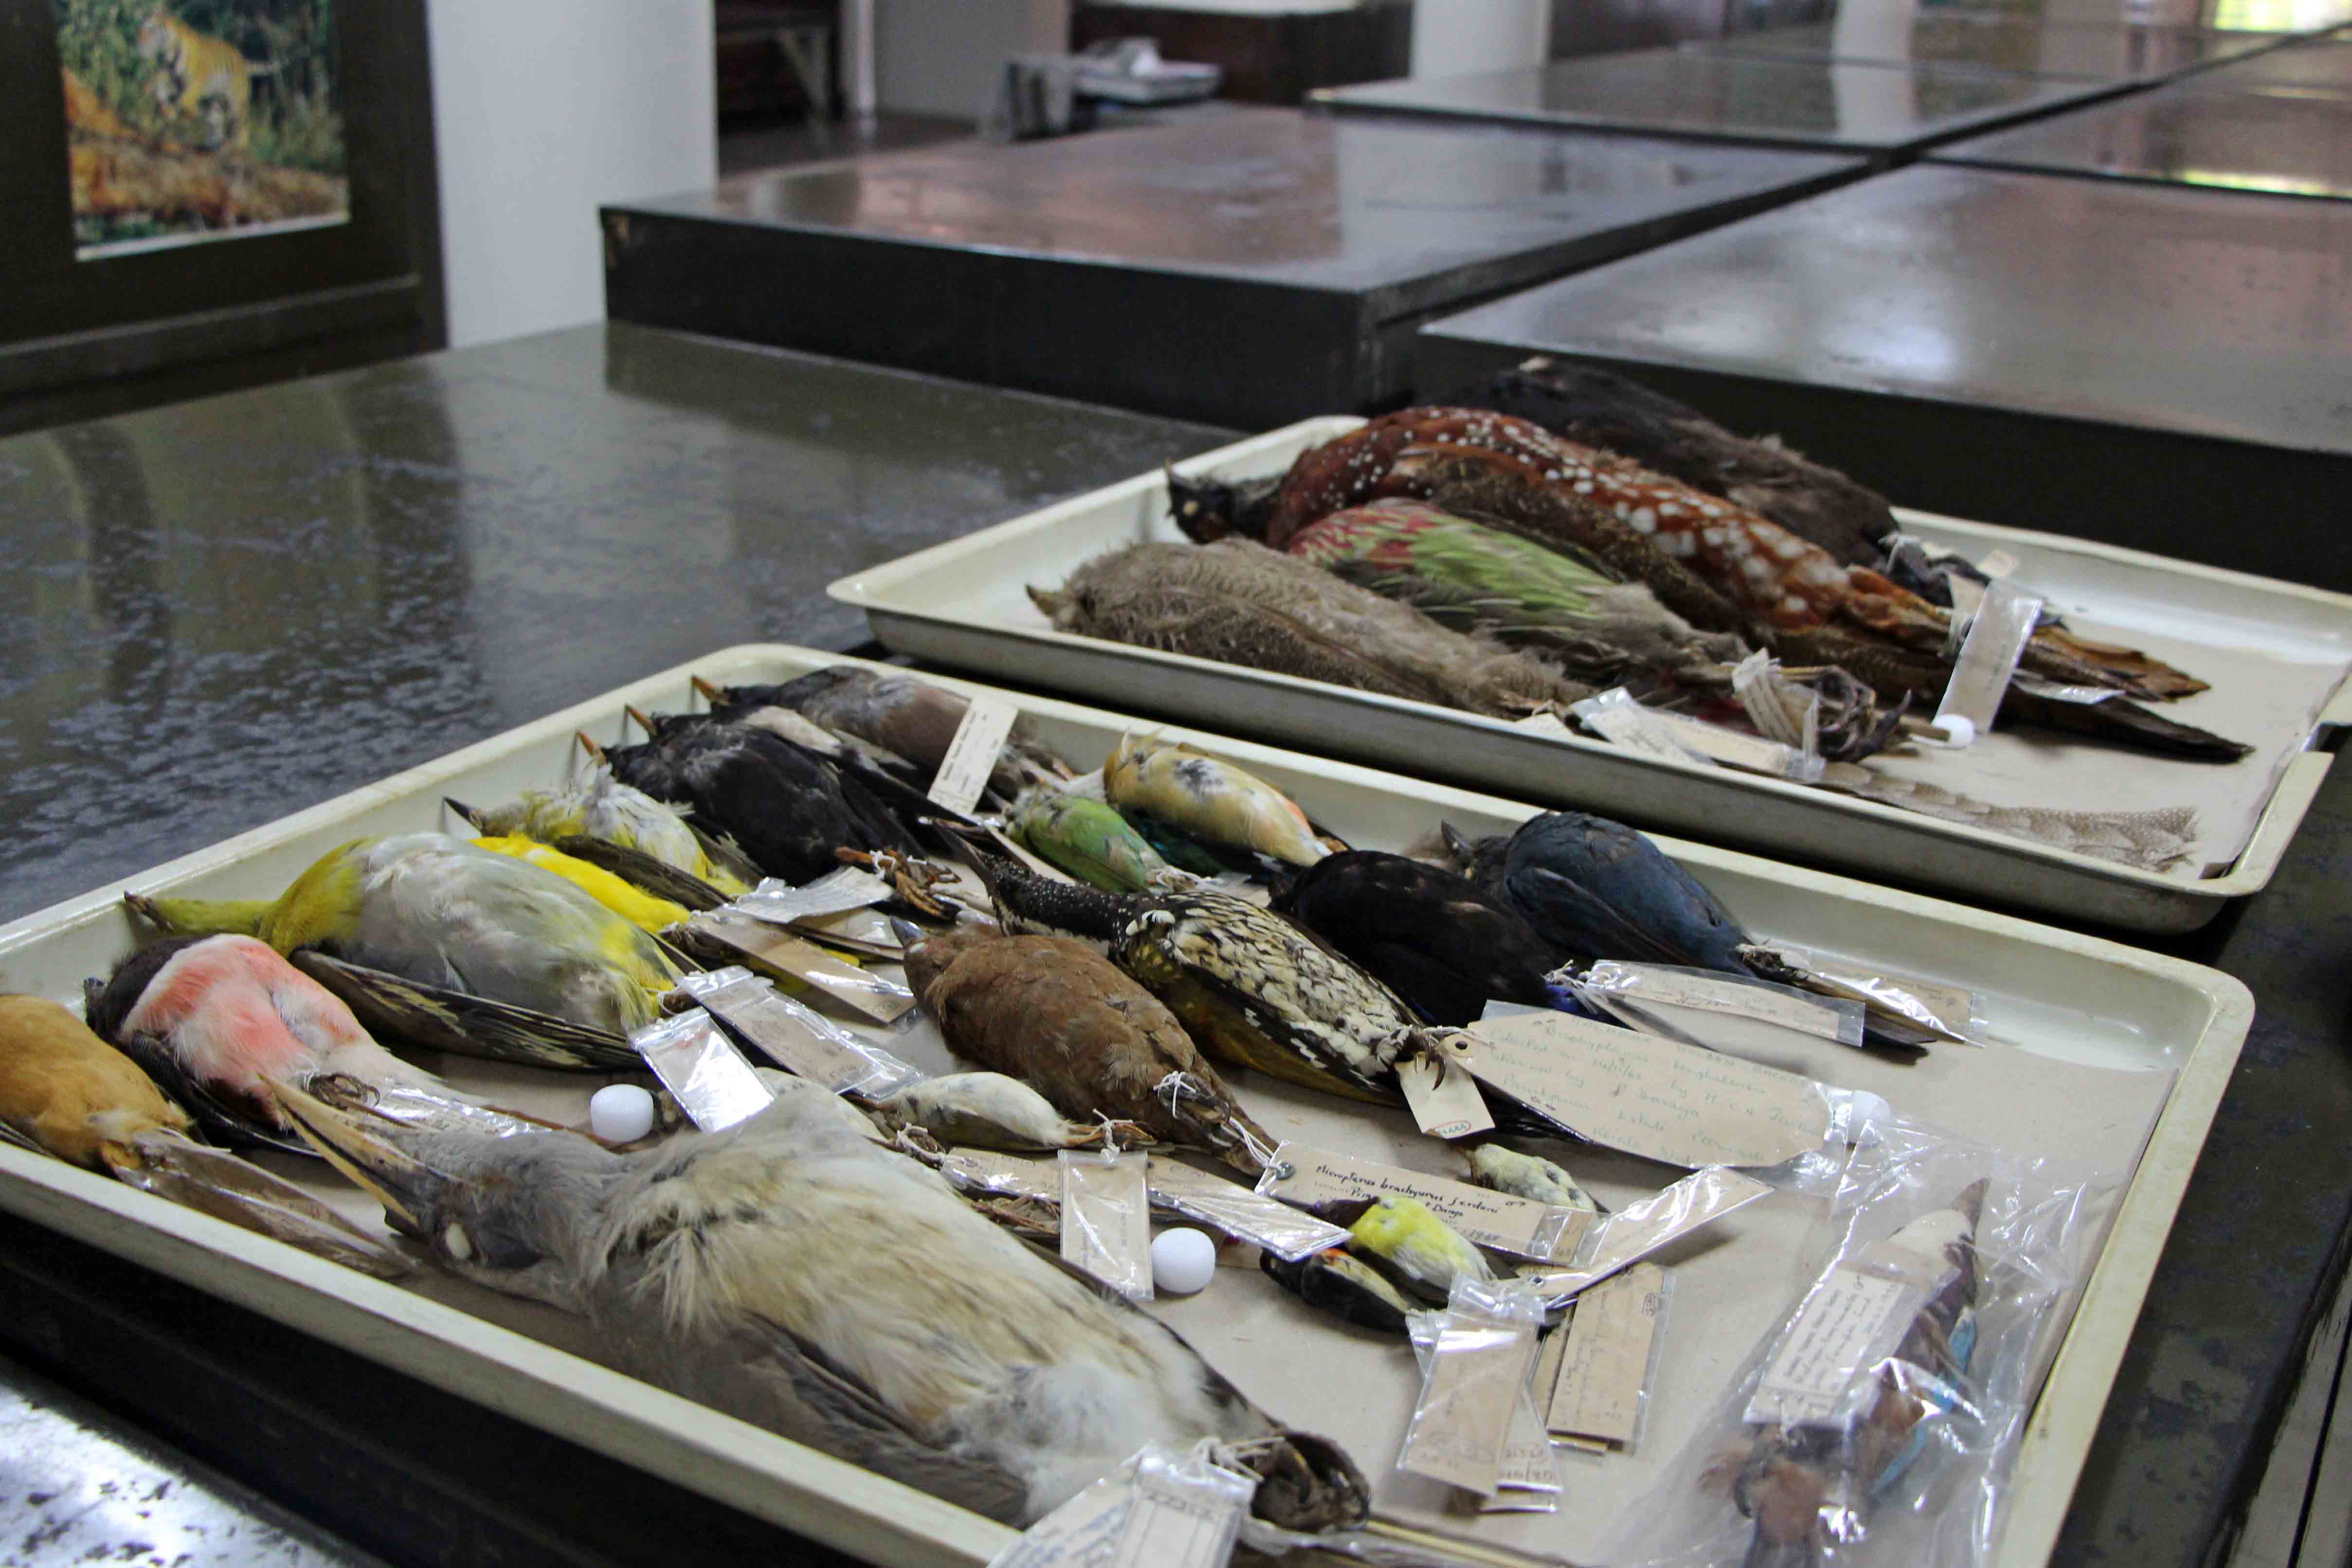 A variety of taxidermically preserved species of birds